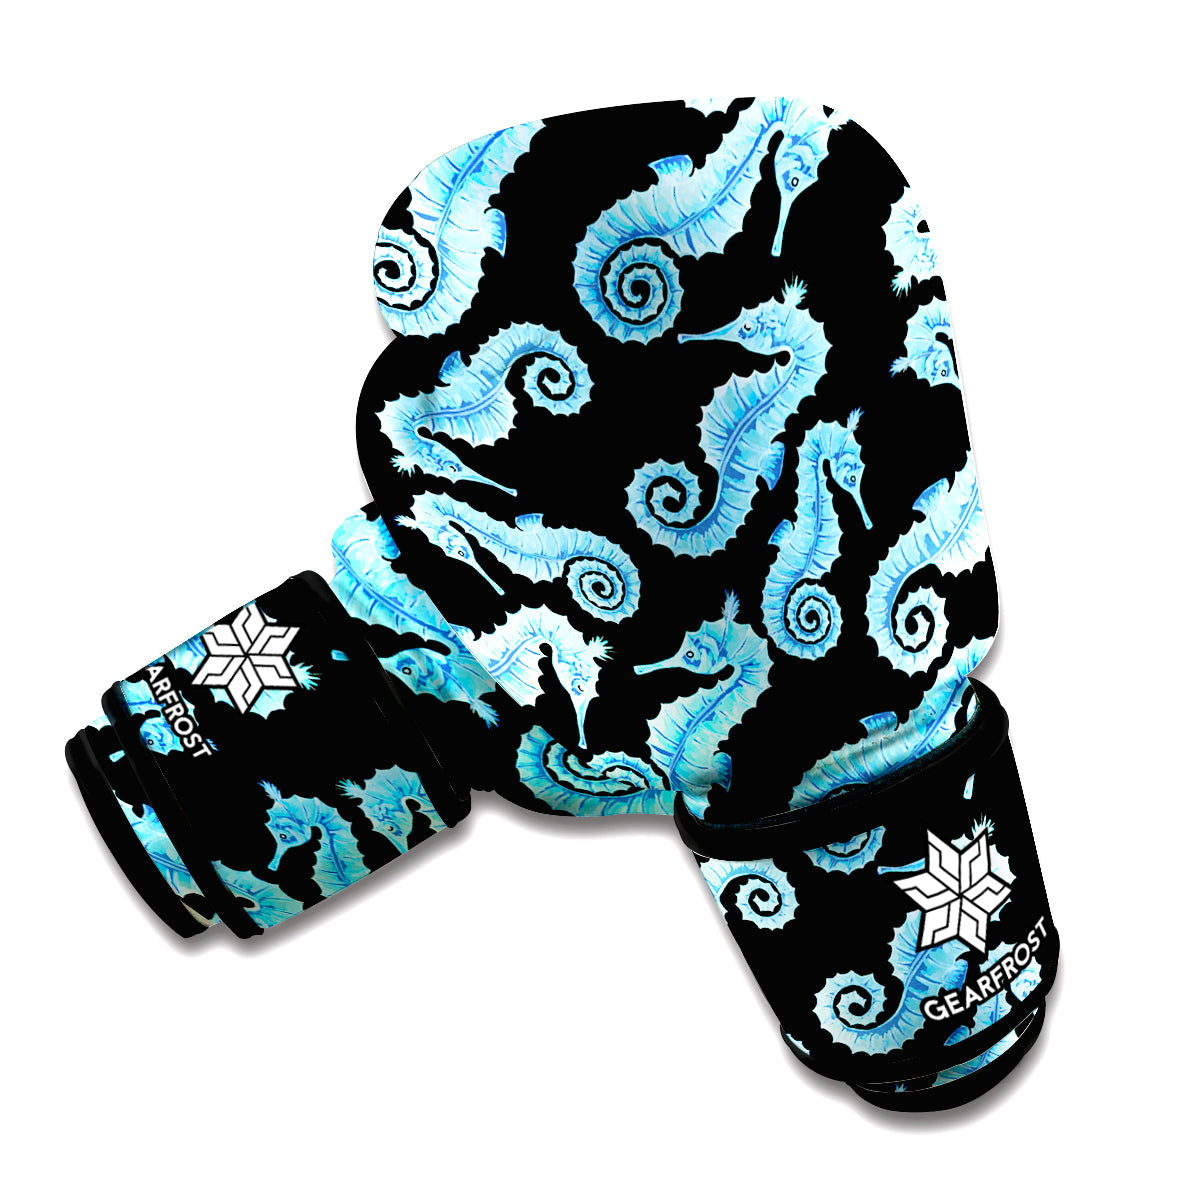 Watercolor Seahorse Pattern Print Boxing Gloves